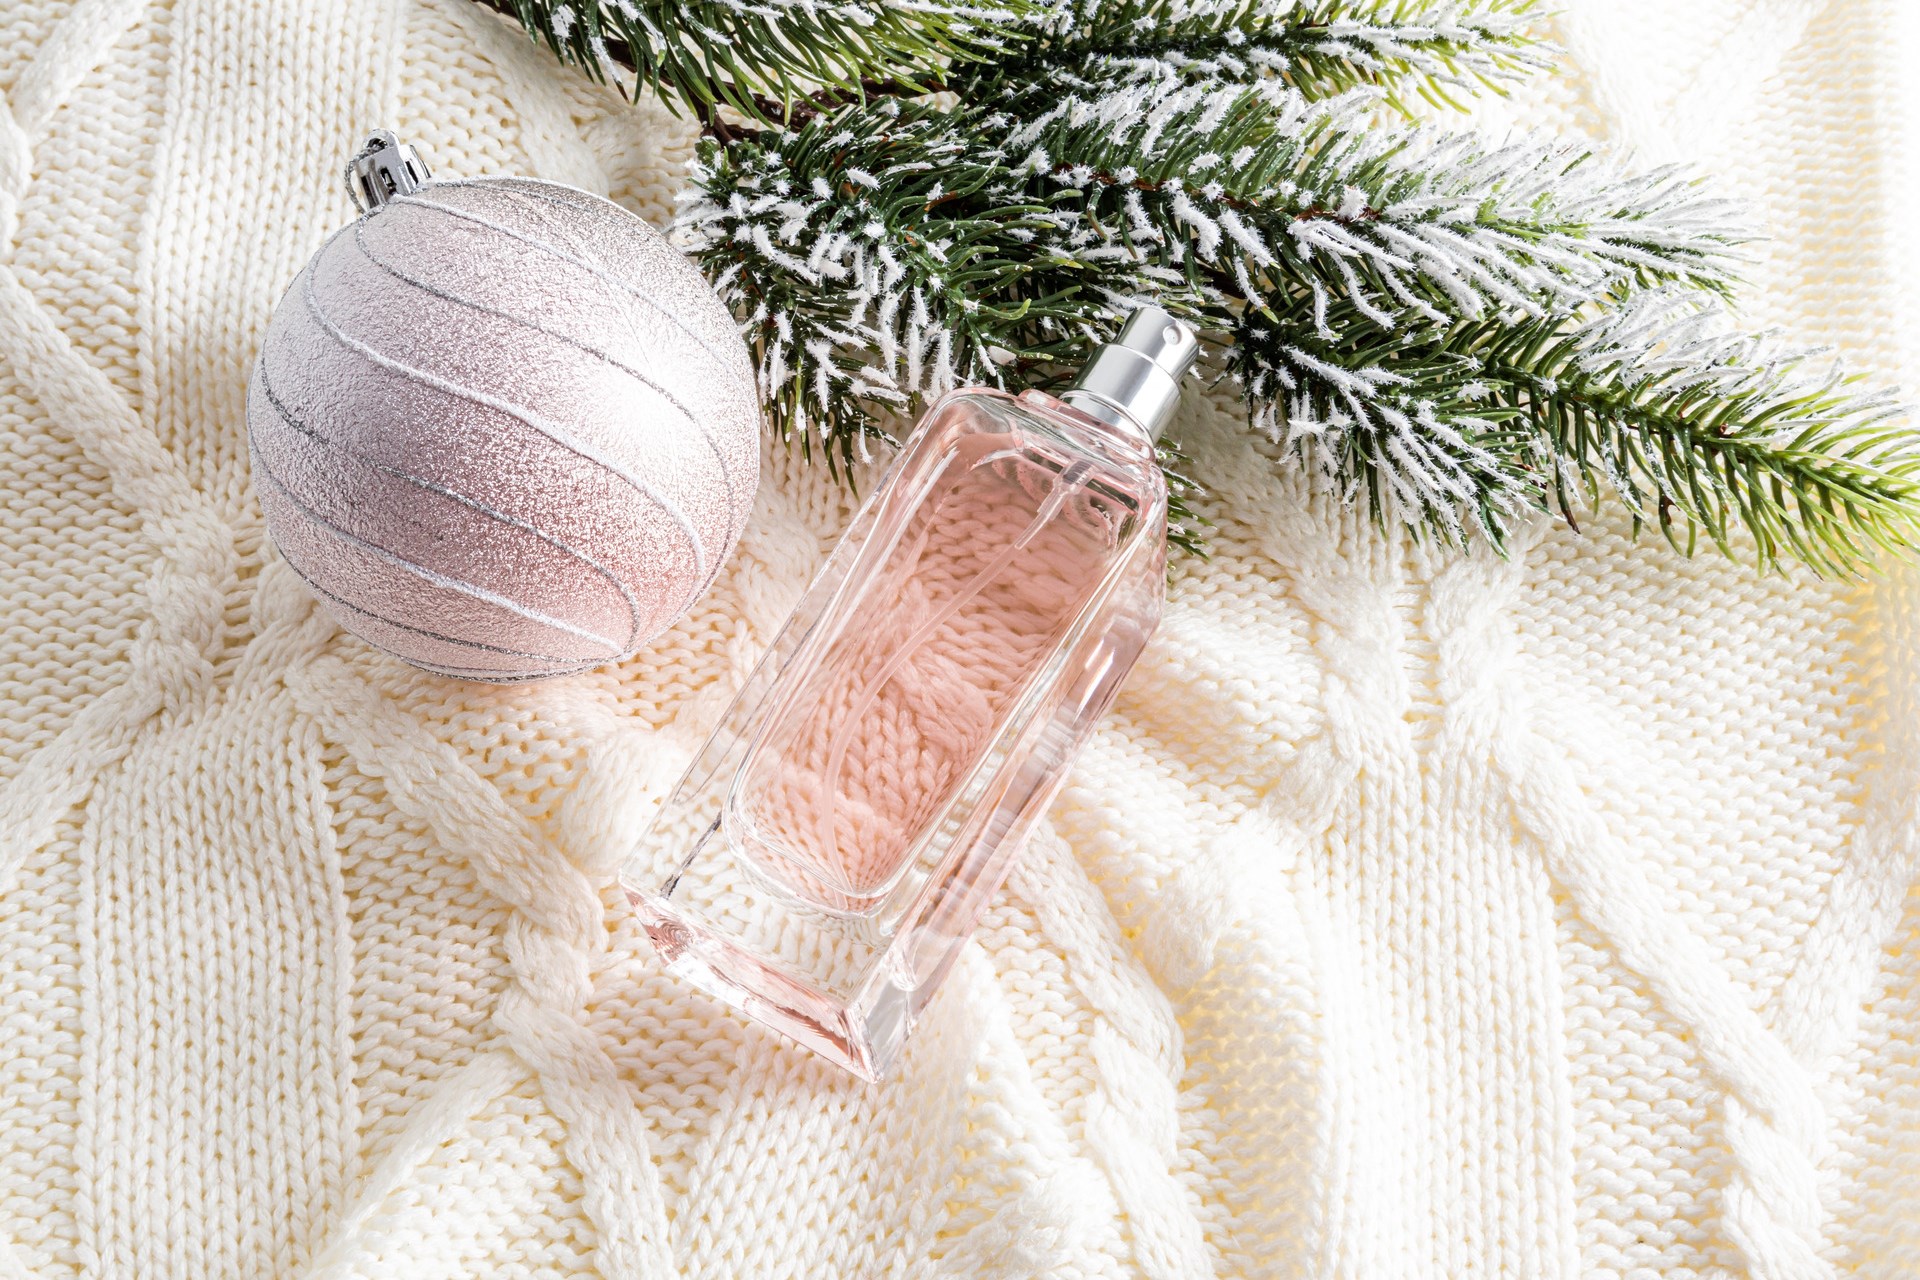 Winter New Year's advertising composition of women's perfumes on a knitted beige background with a beautiful ball and a branch of spruce.